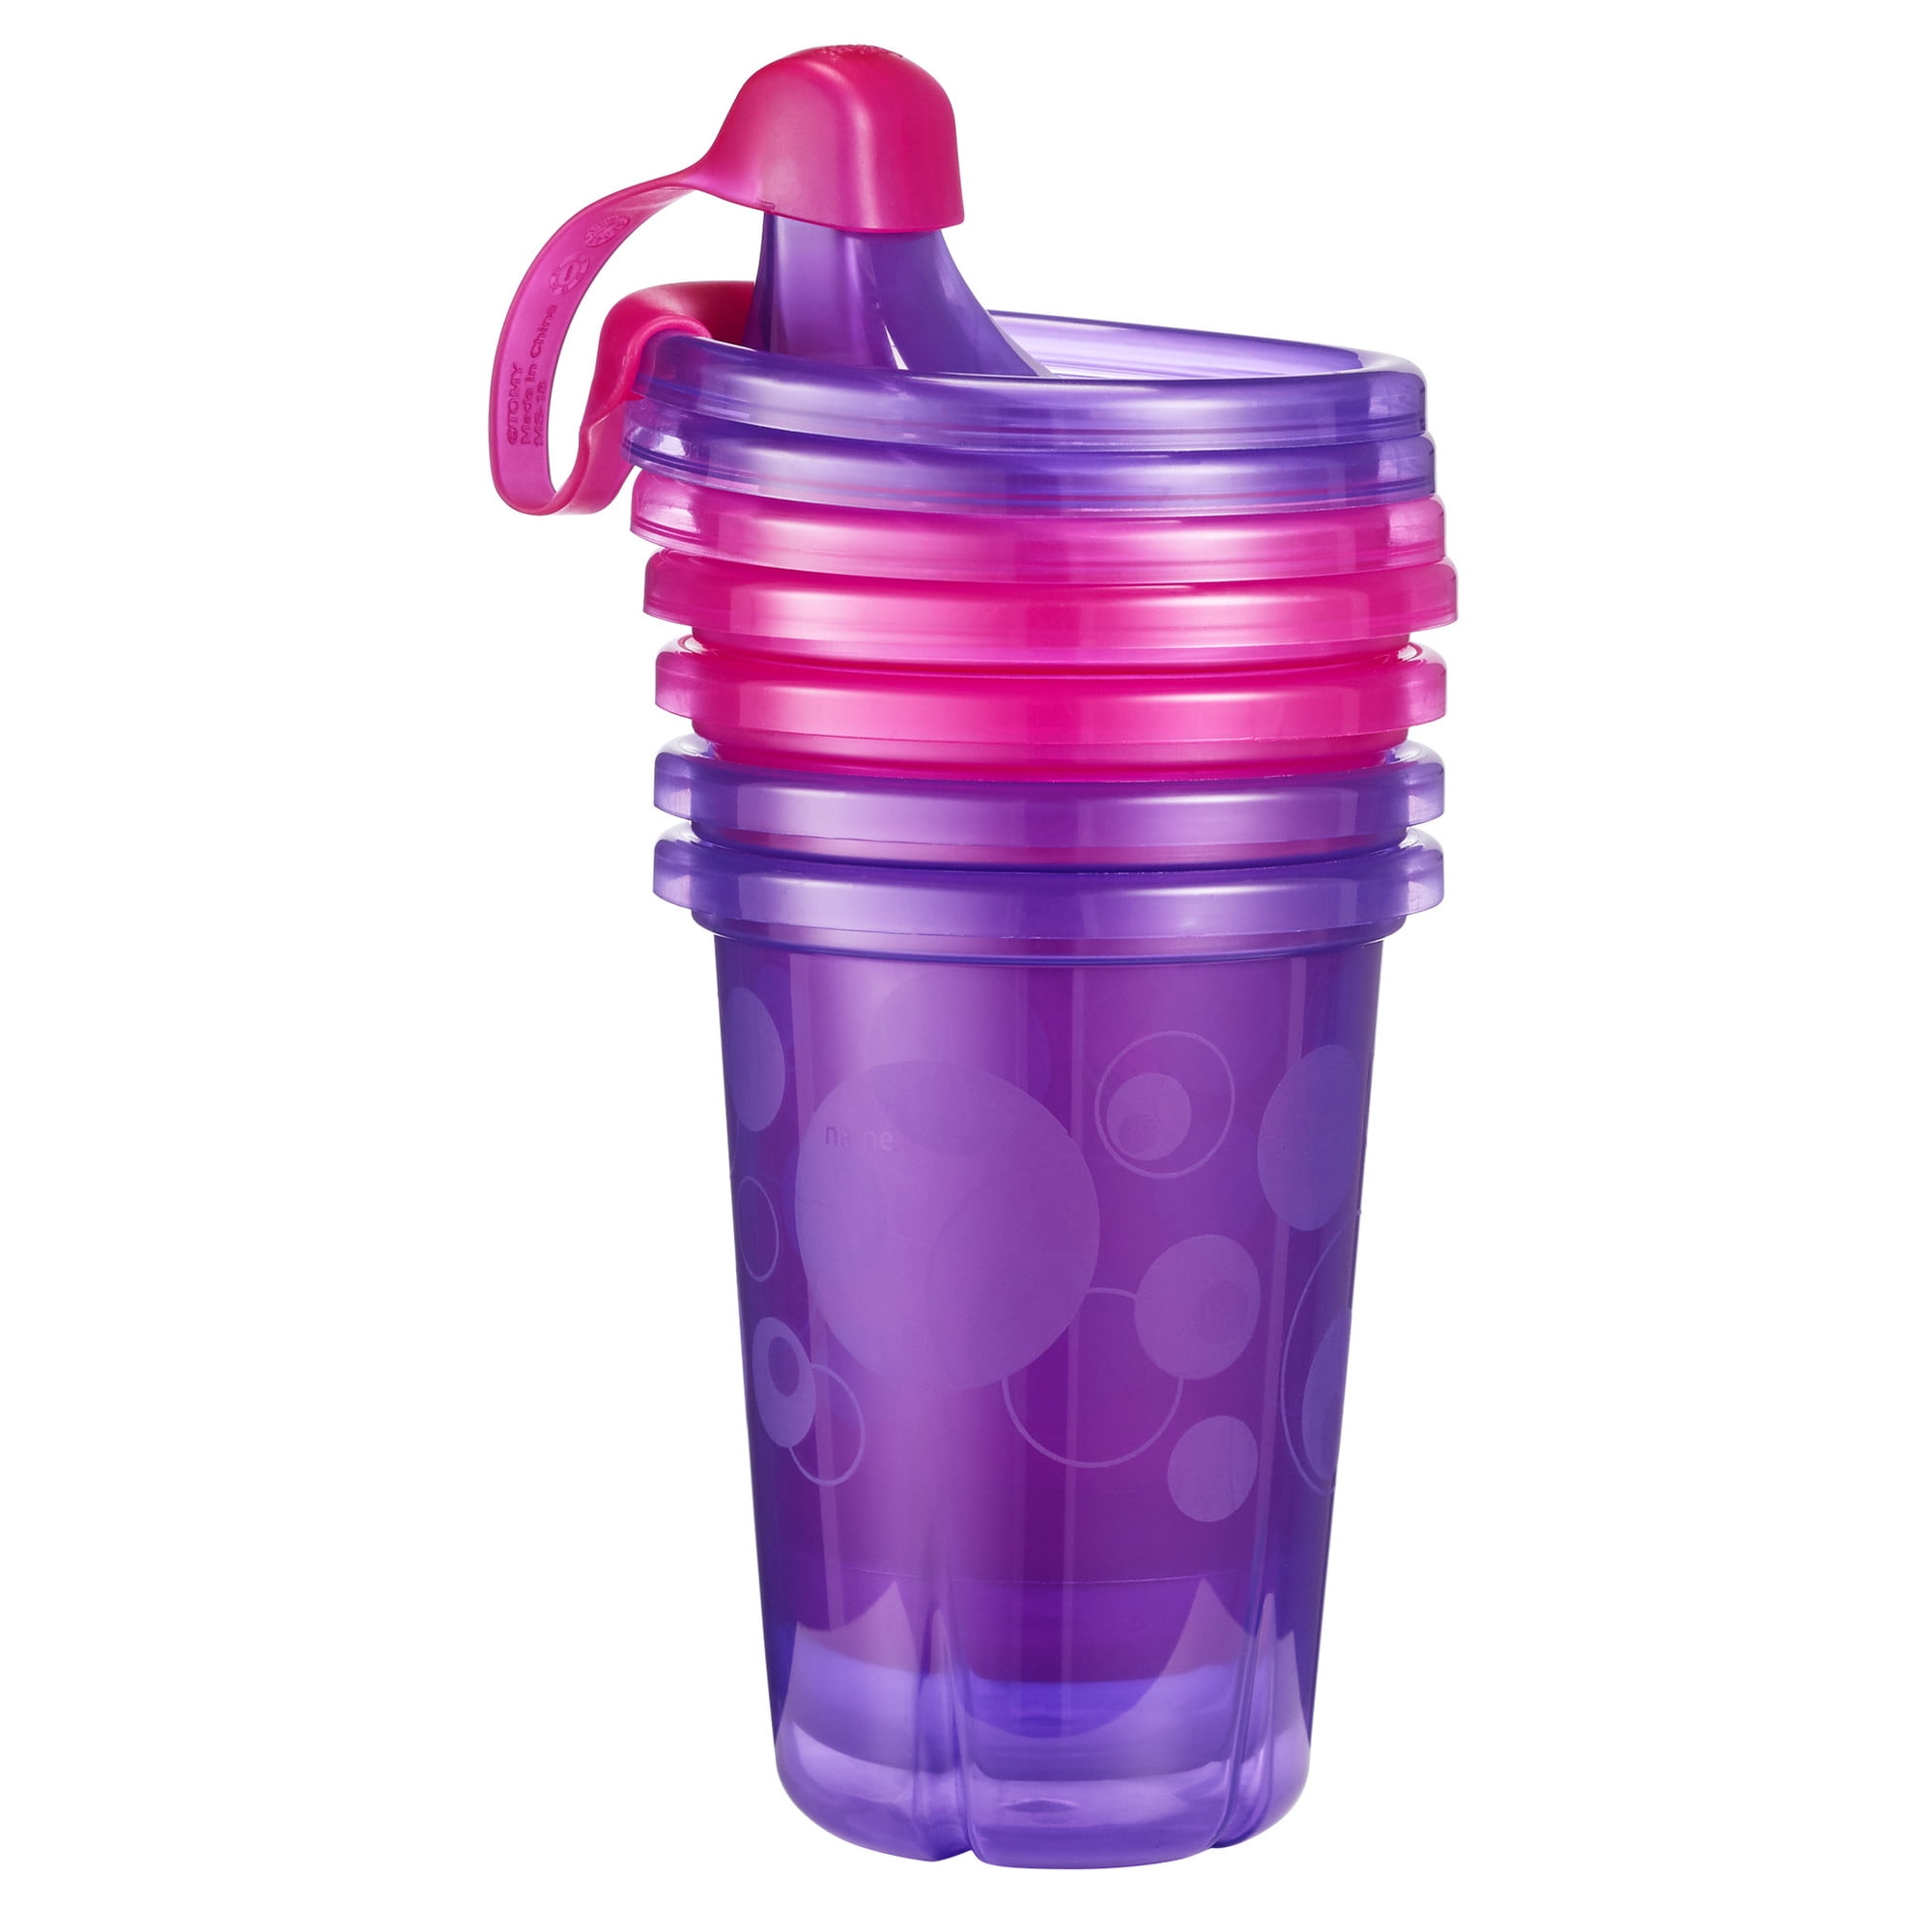 The First Years Take & Toss Sippy Cups, 9+ months - 4 count, 10 oz each